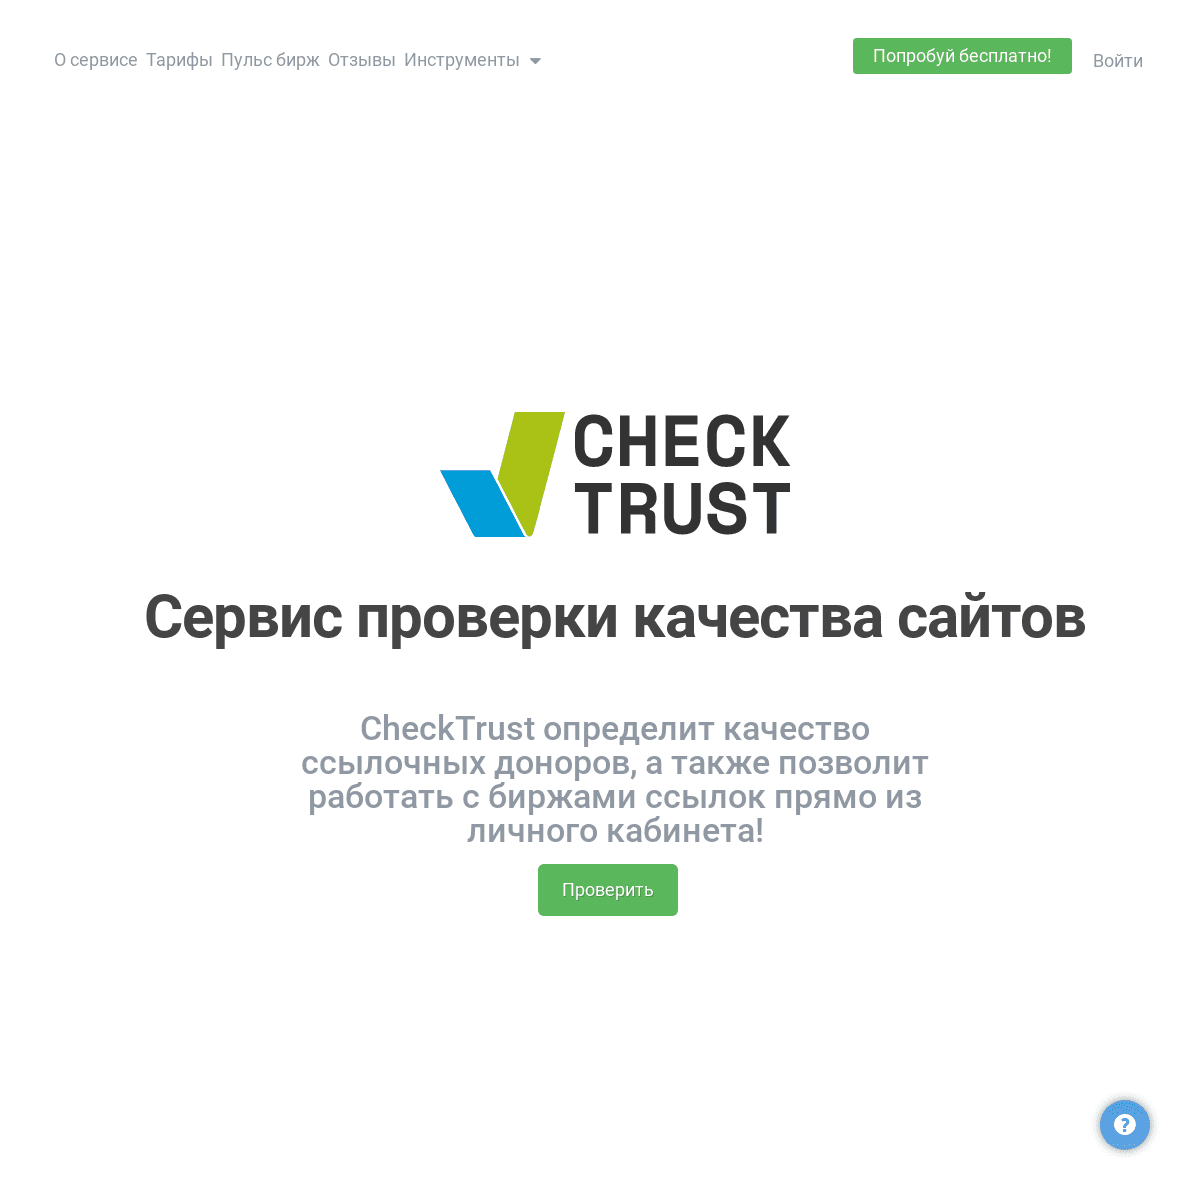 A complete backup of https://checktrust.ru